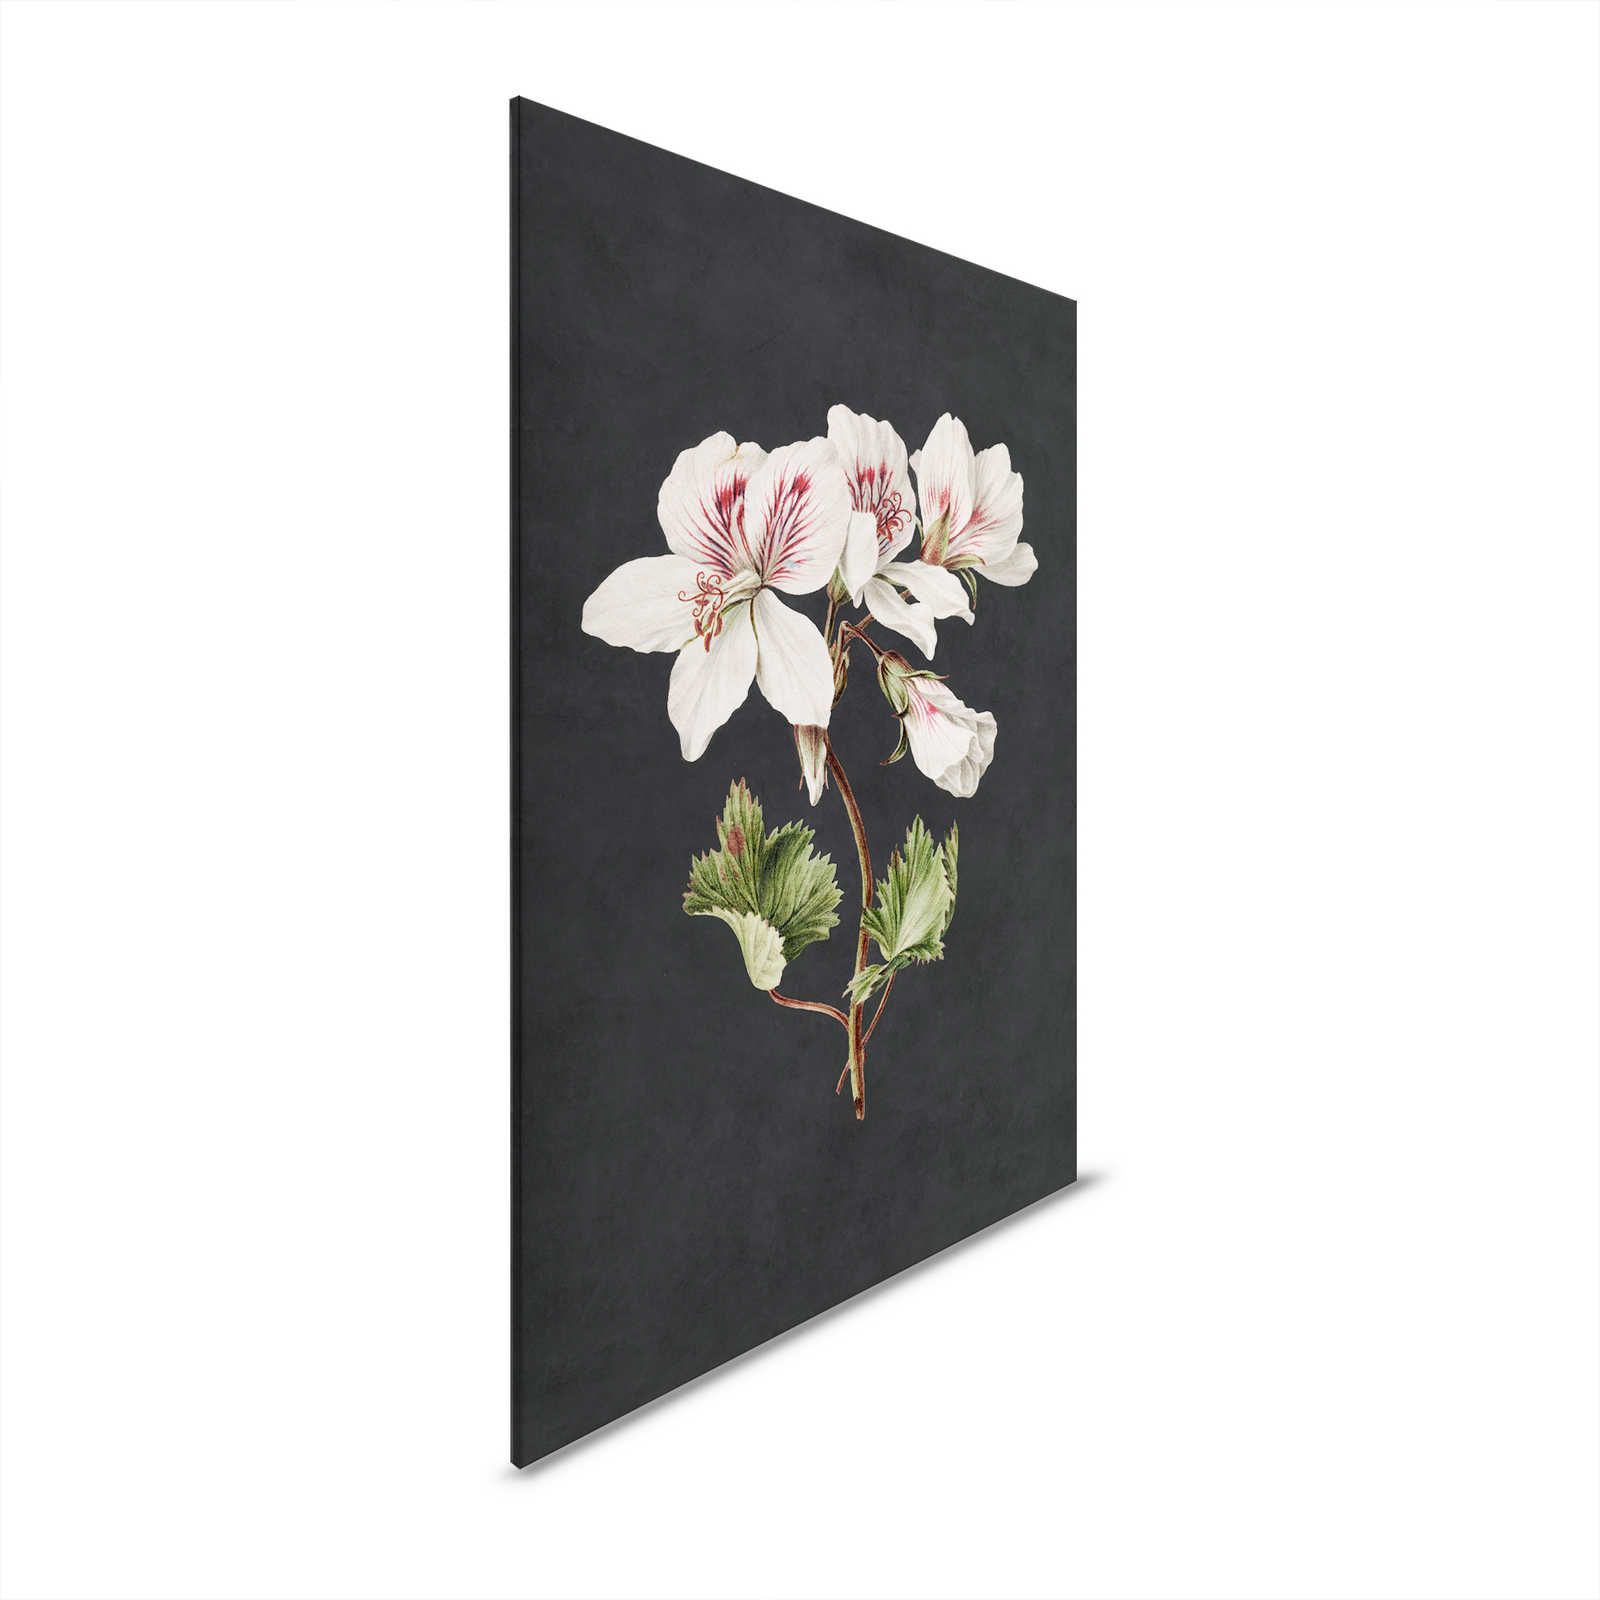 Midnight Garden 1 - Black Canvas Painting Lily Blossom Painting Style - 0.60 m x 0.90 m
